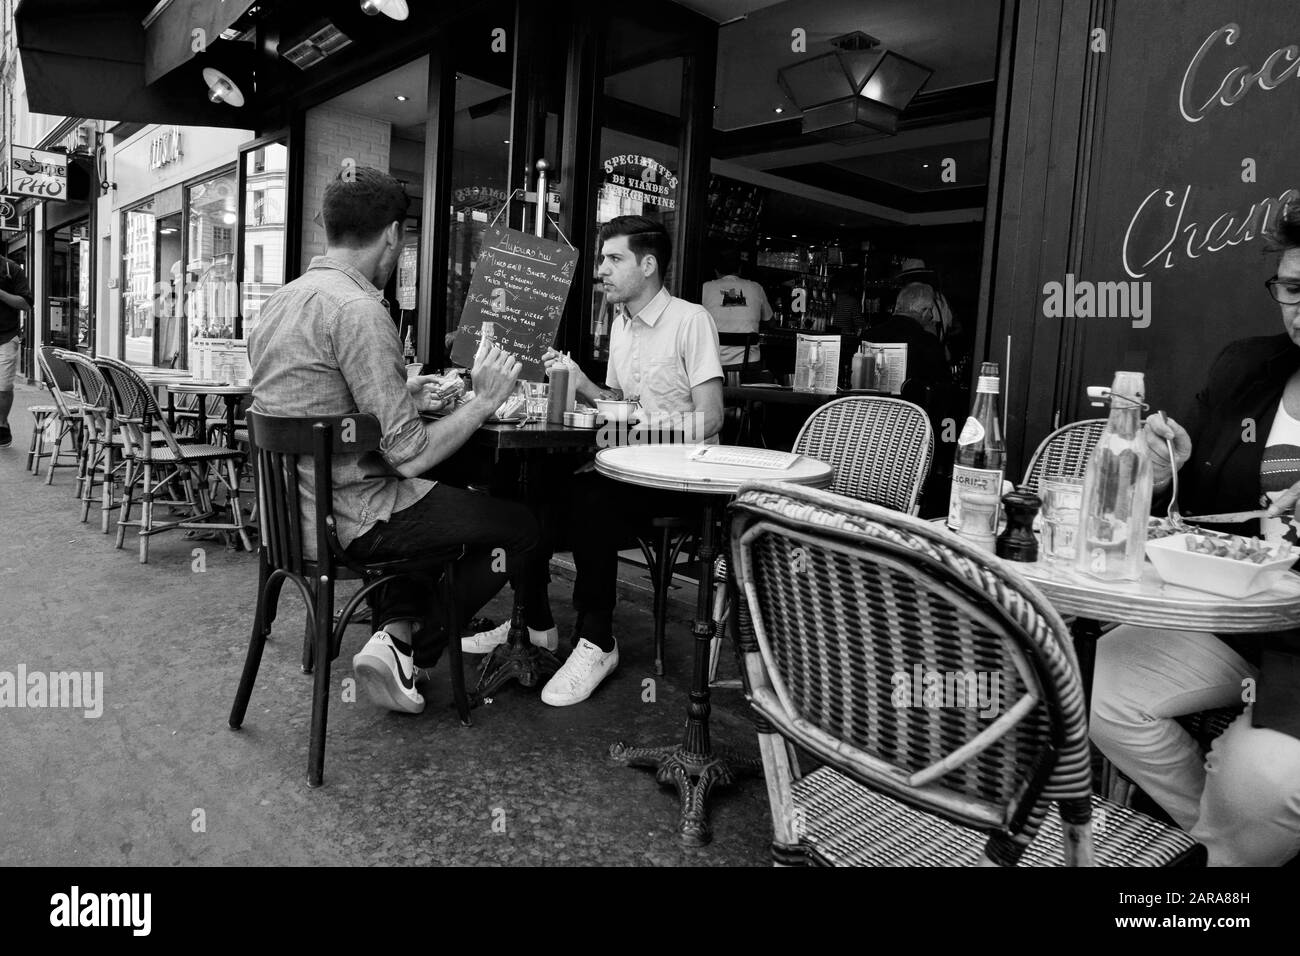 Two friends eating, Cafe on pavement, Paris, France, Europe Stock Photo